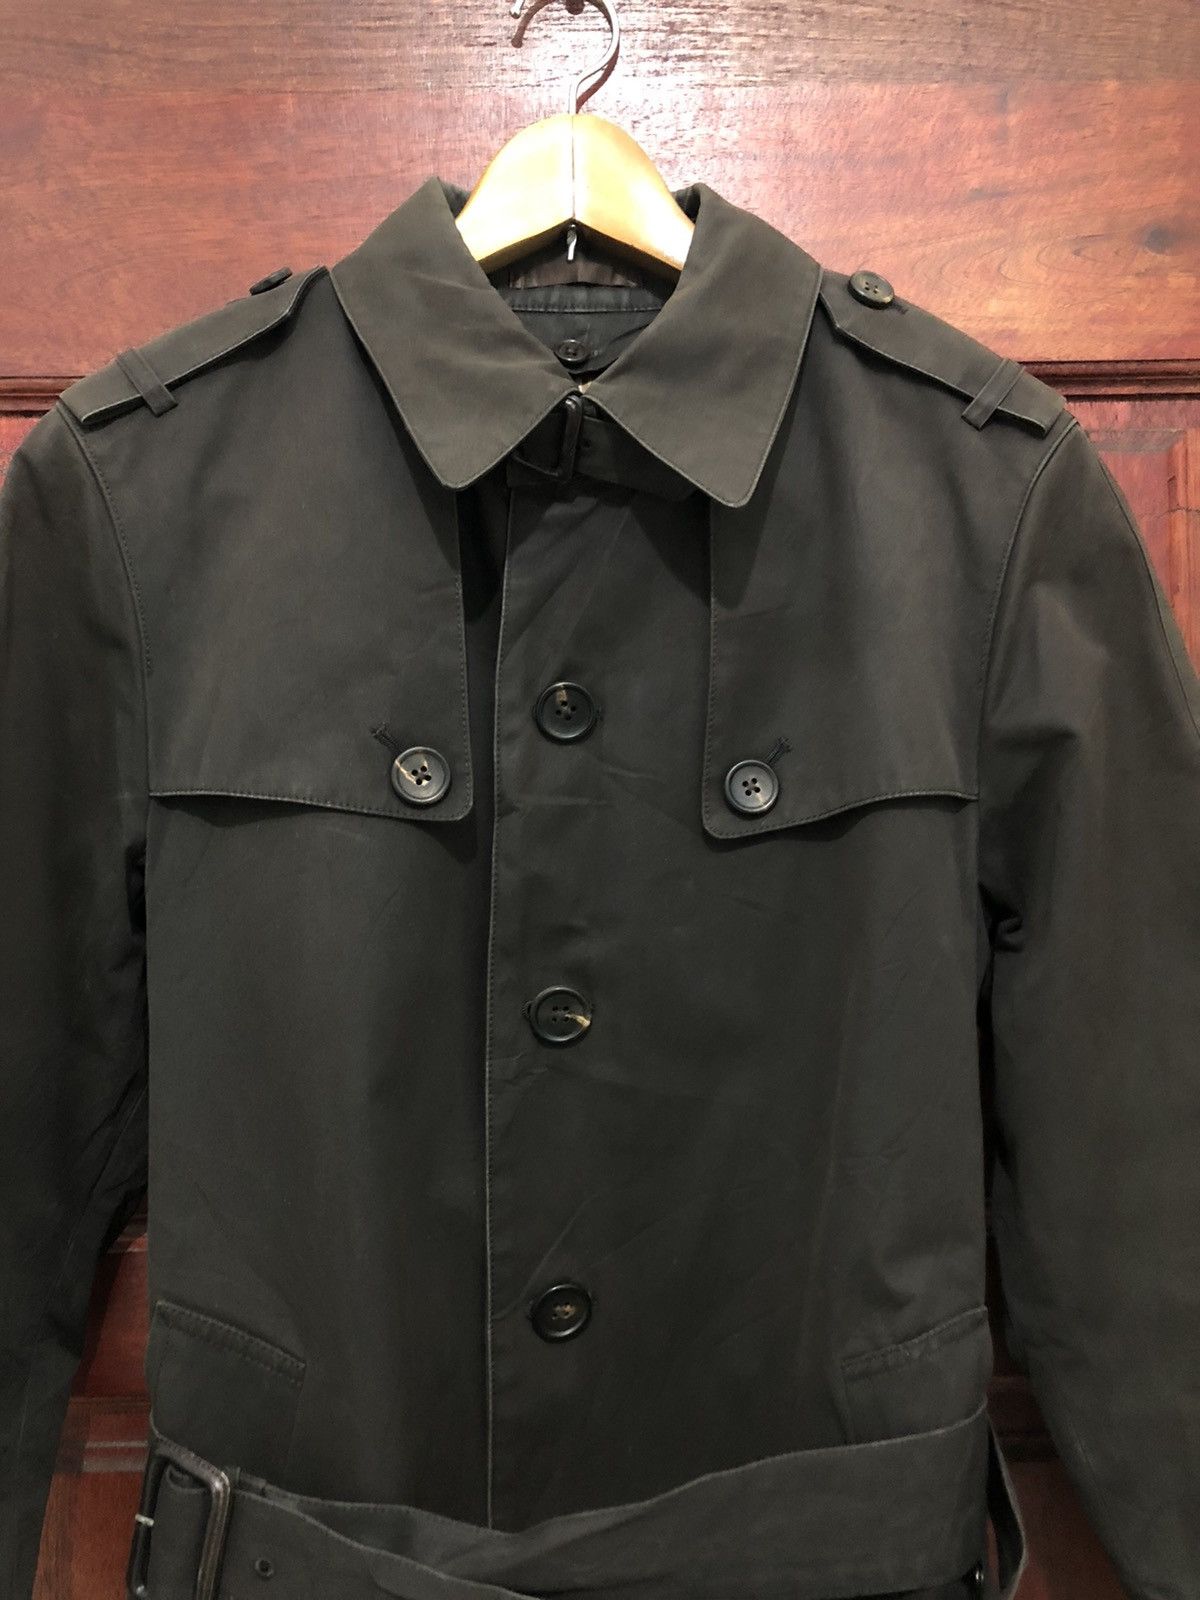 Paul Smith Trench Coat Dark Brown Colour - 6